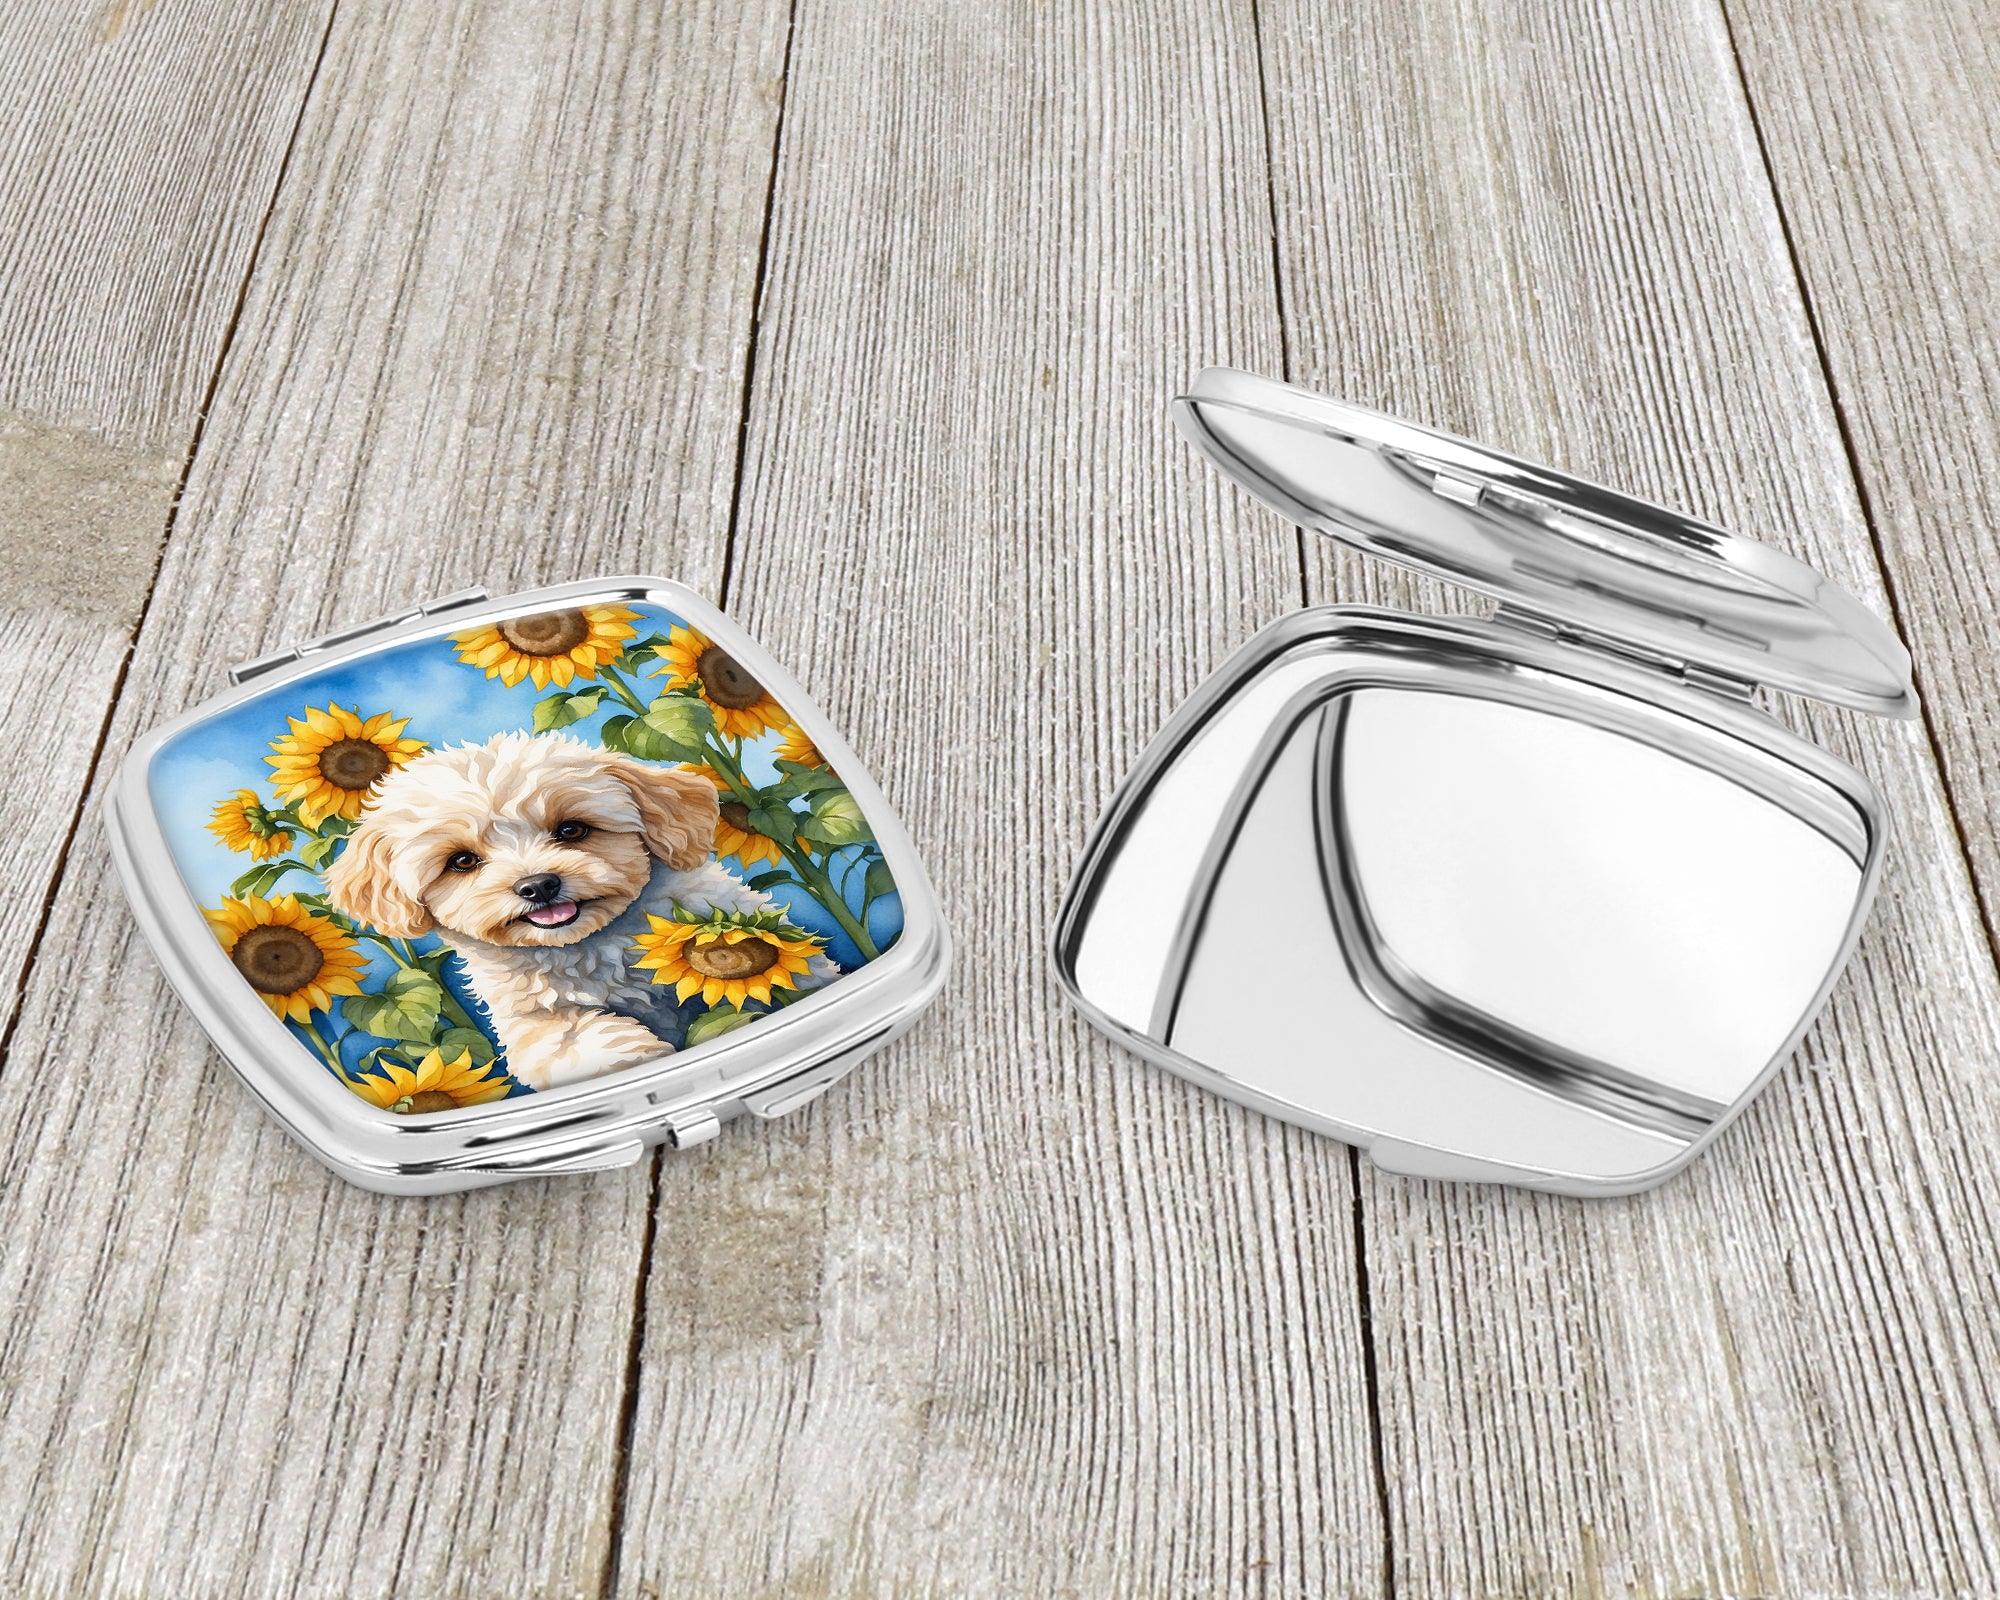 Maltipoo in Sunflowers Compact Mirror